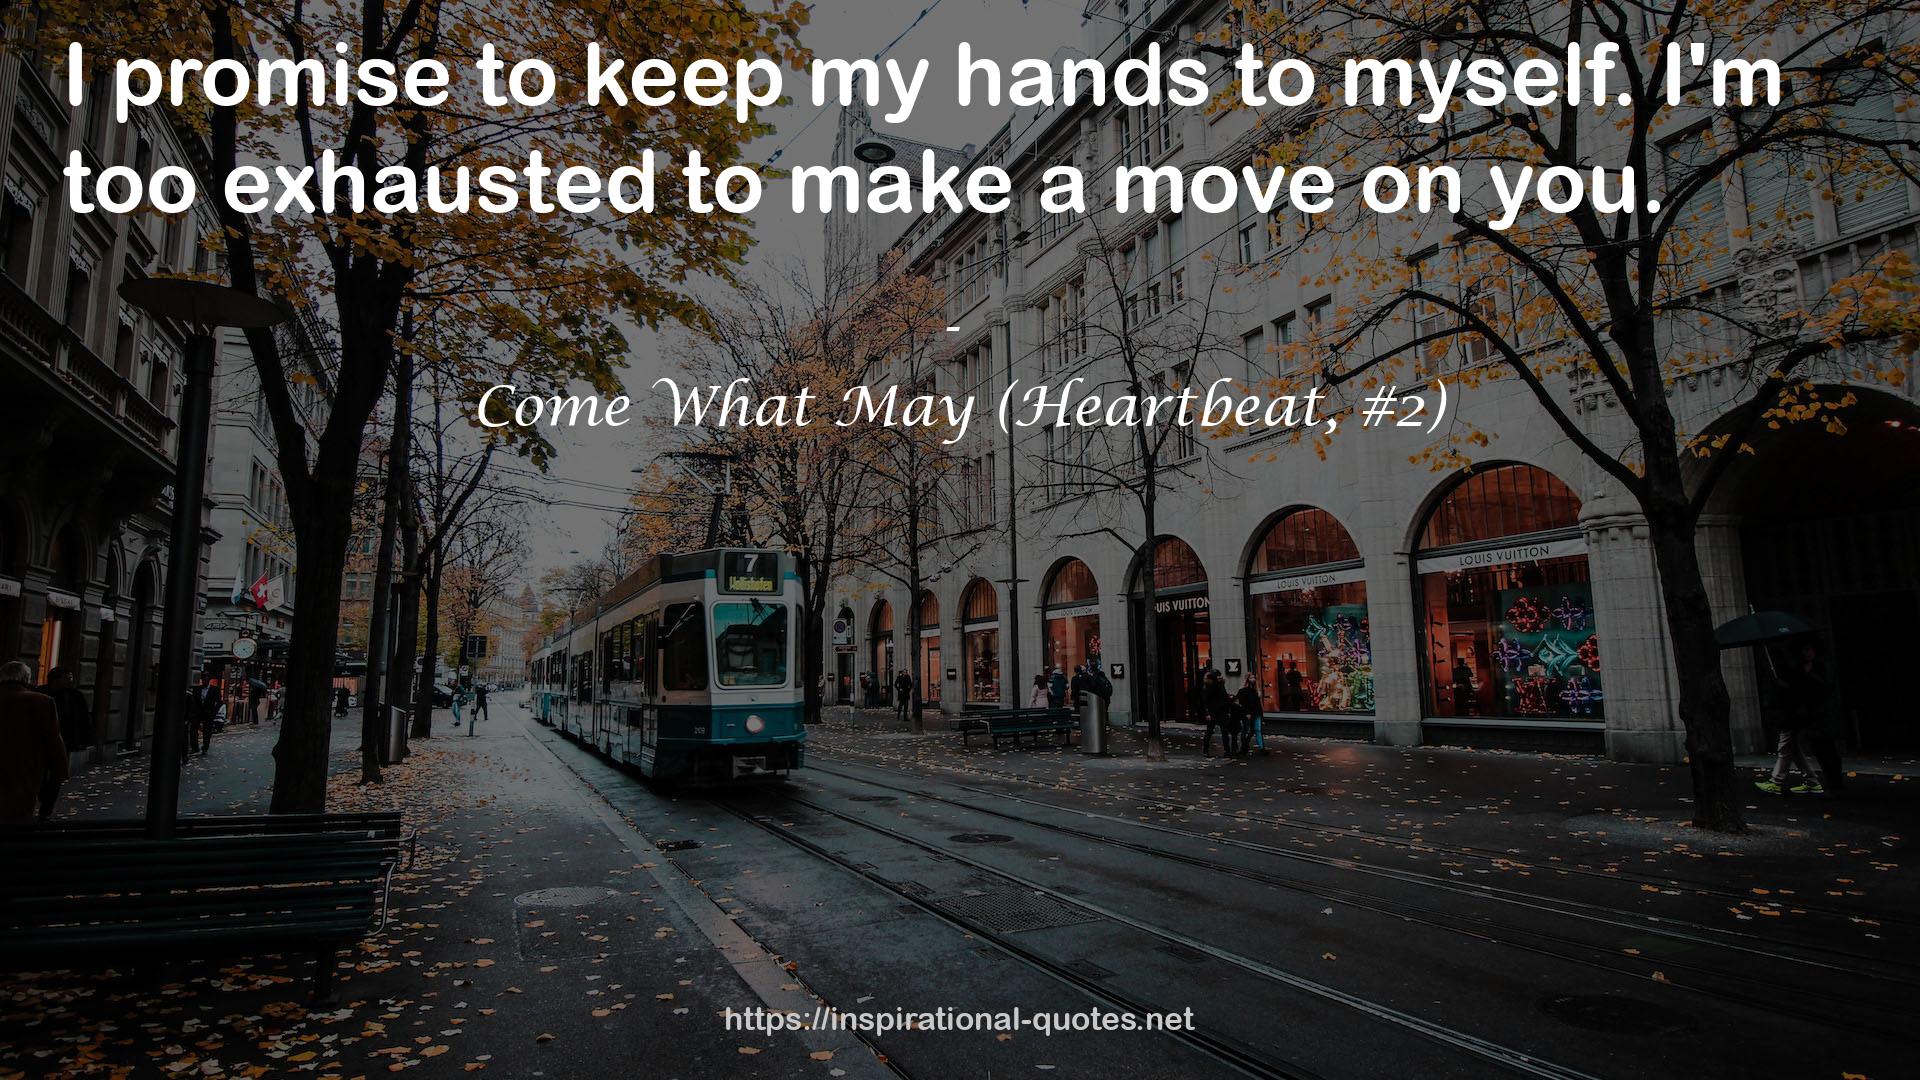 Come What May (Heartbeat, #2) QUOTES